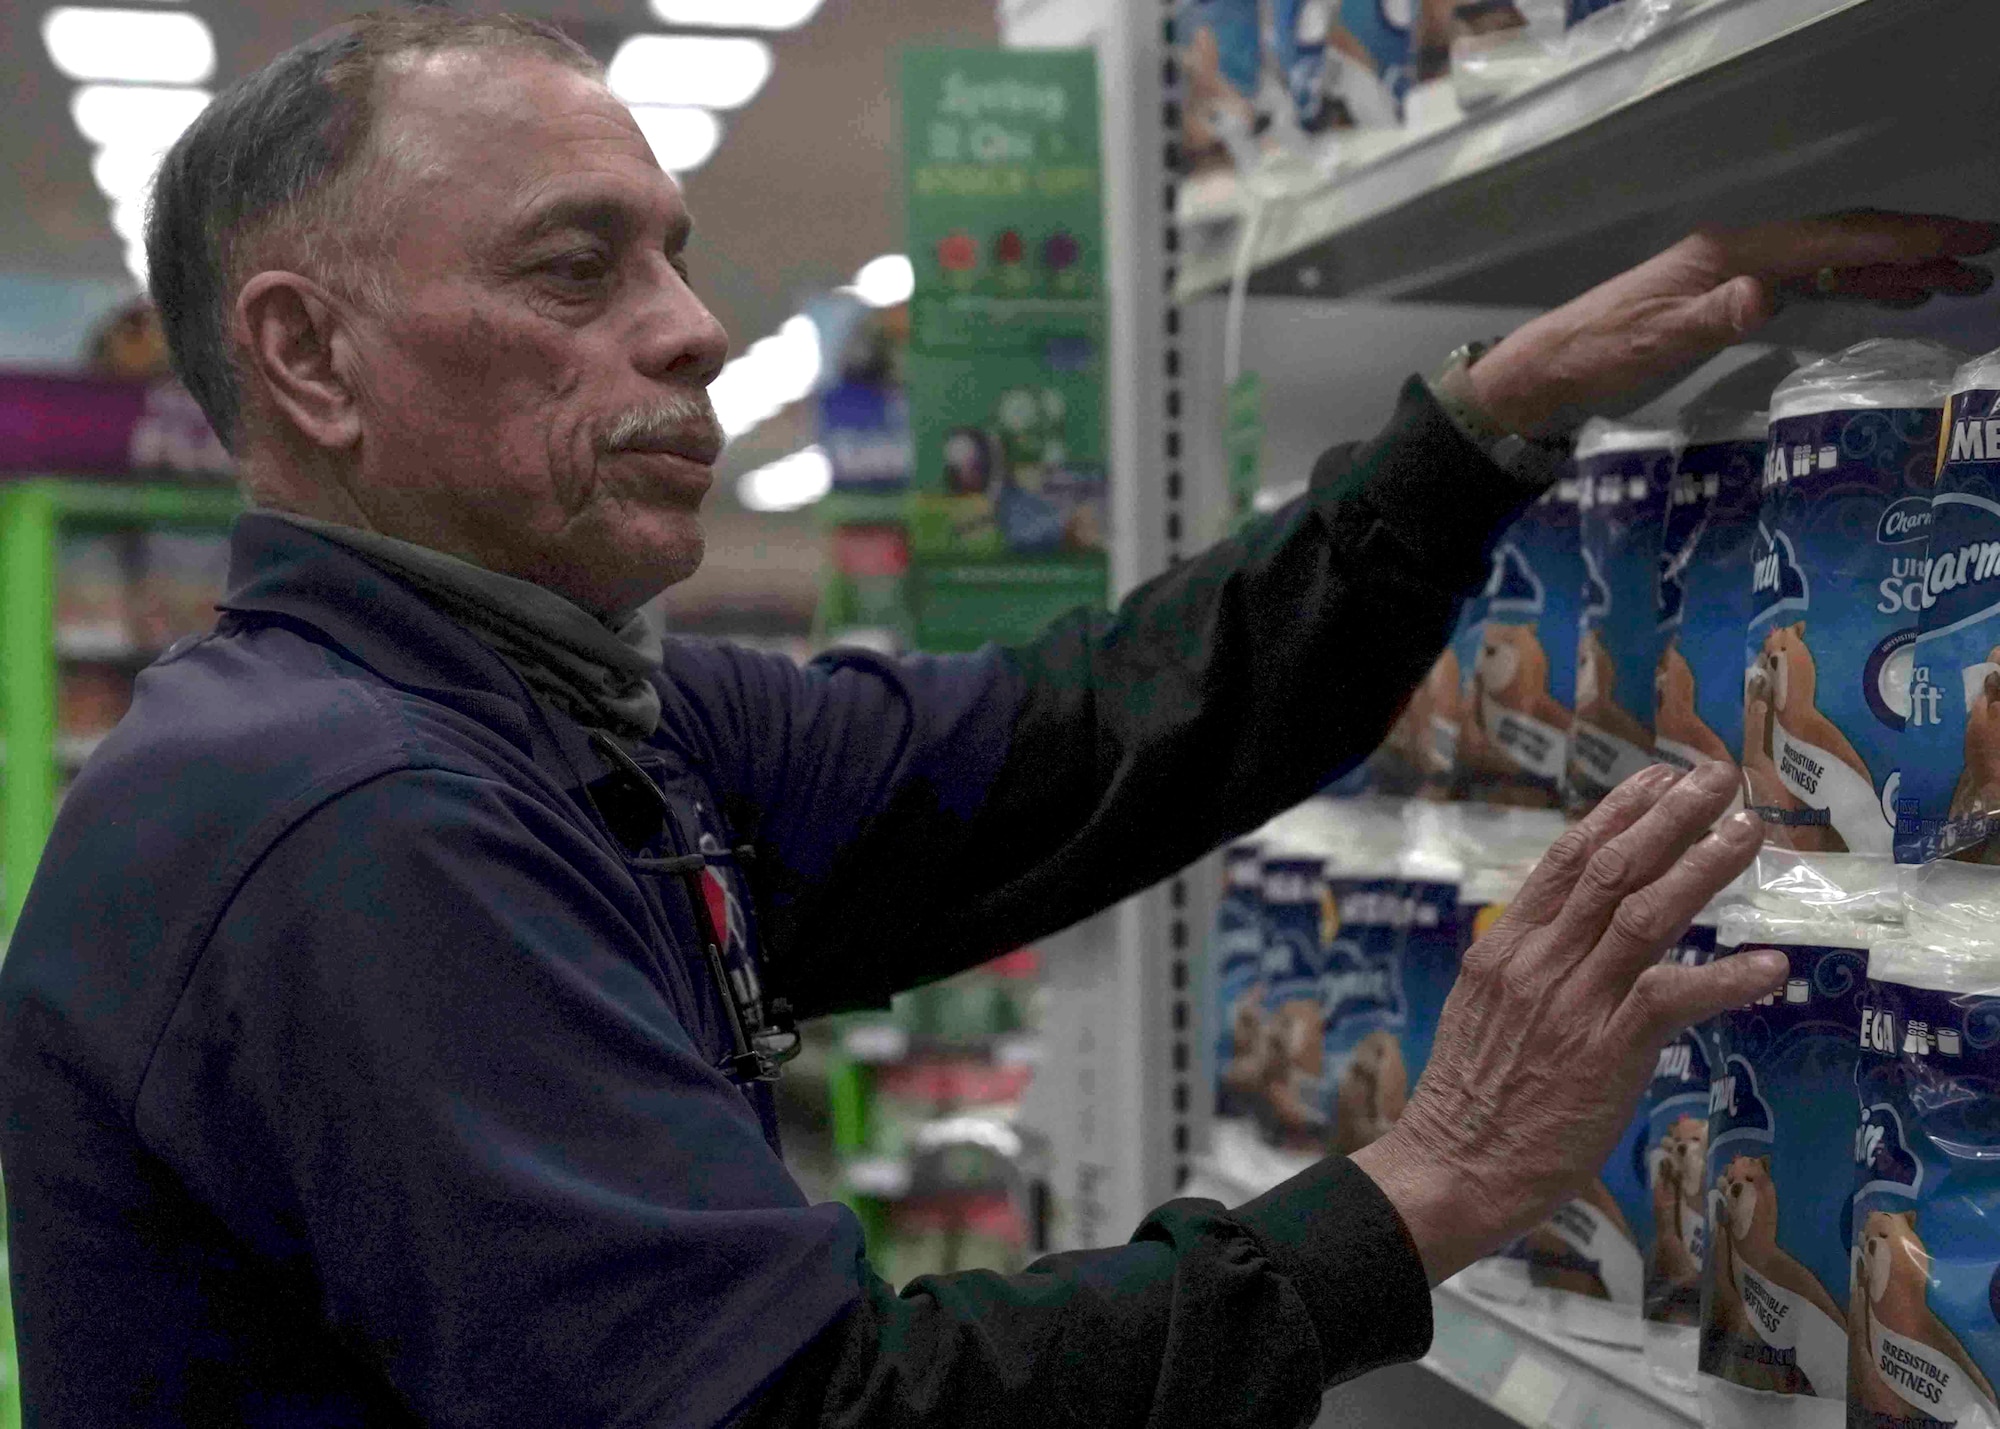 Rich Vega, stockroom manager, restocks toilet paper in the Exchange on Nellis Air Force Base, Nevada, March 25, 2020. The Exchange and commissary have prioritized restocking high-demand items, such as toilet paper and hand sanitizer, which sell out quickly during the COVID-19 pandemic. (U.S. Air Force photo by Senior Airman Stephanie Gelardo)